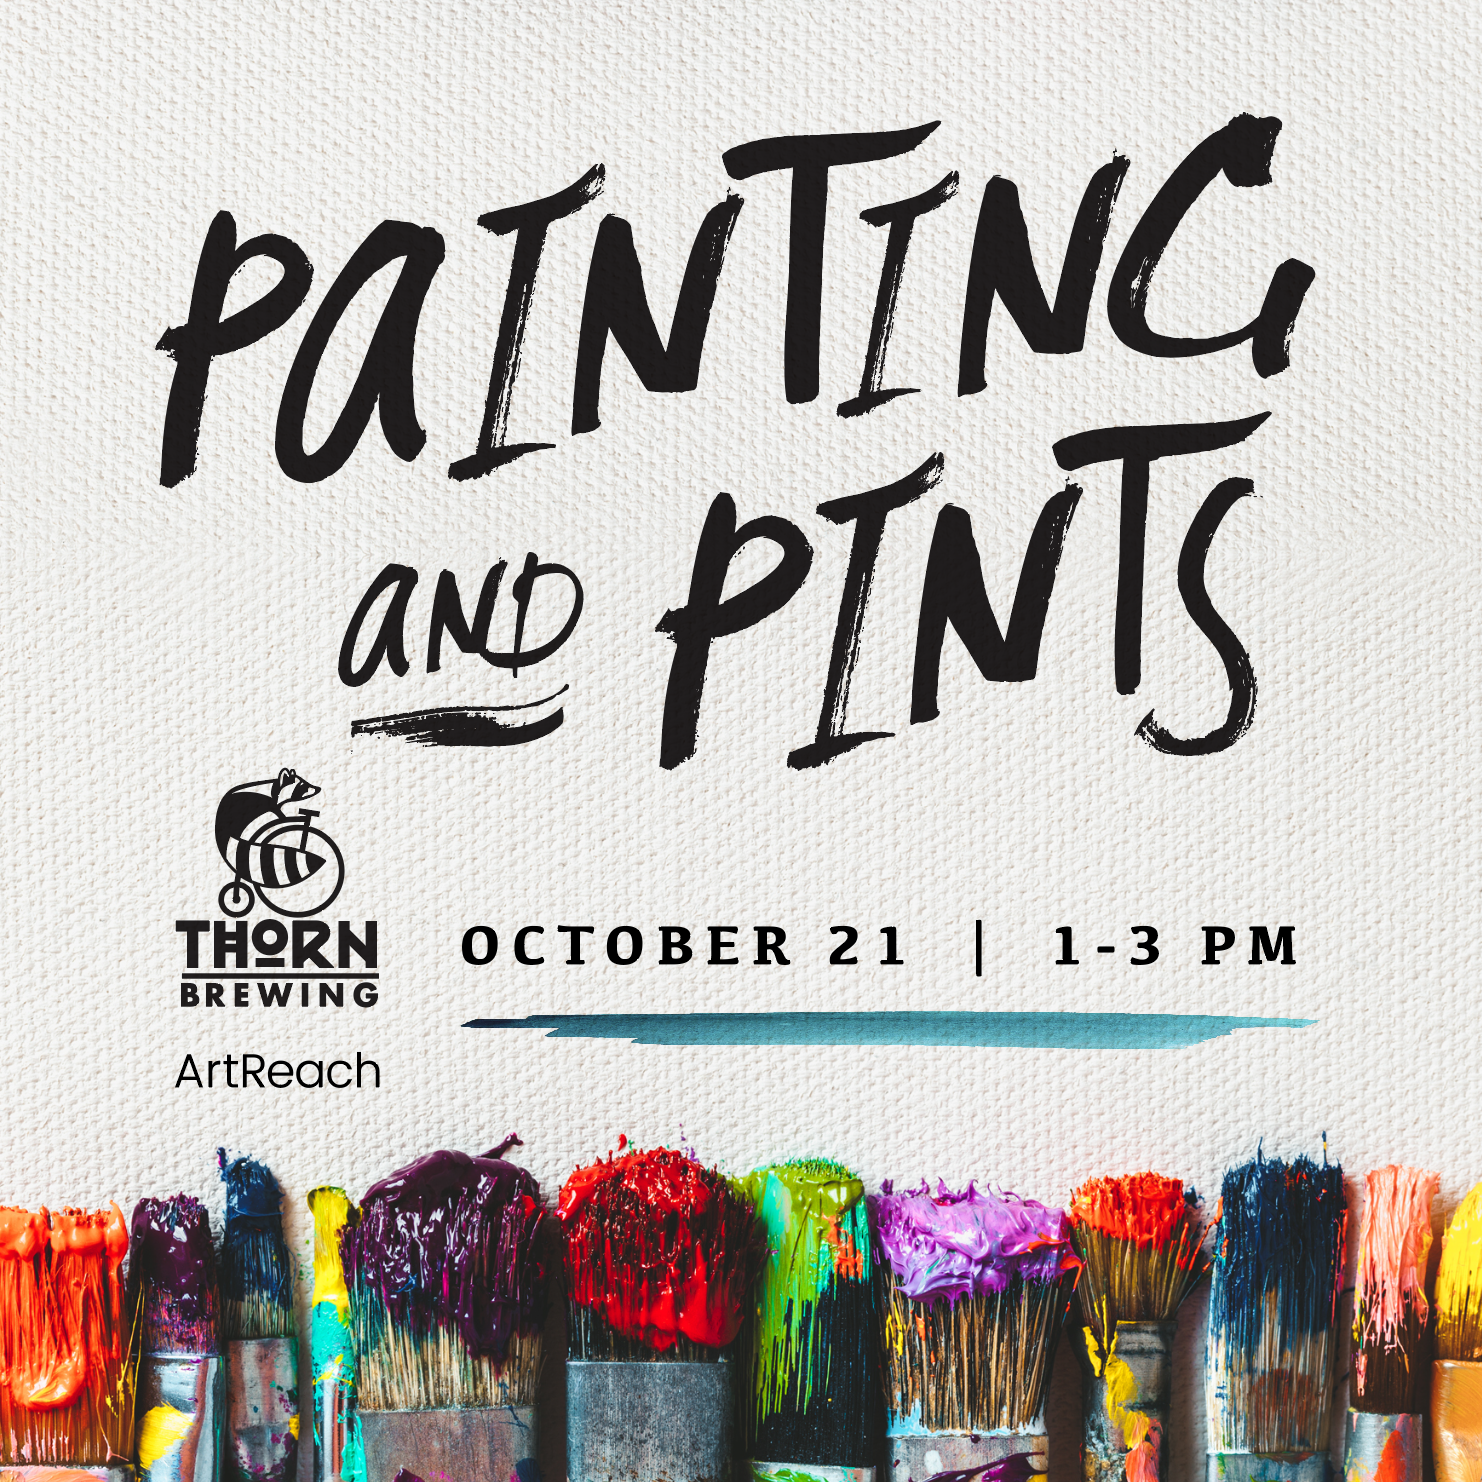 paint brushes lined up on the bottom of a graphic promoting painting and pints a fundaiser at thorn north park.